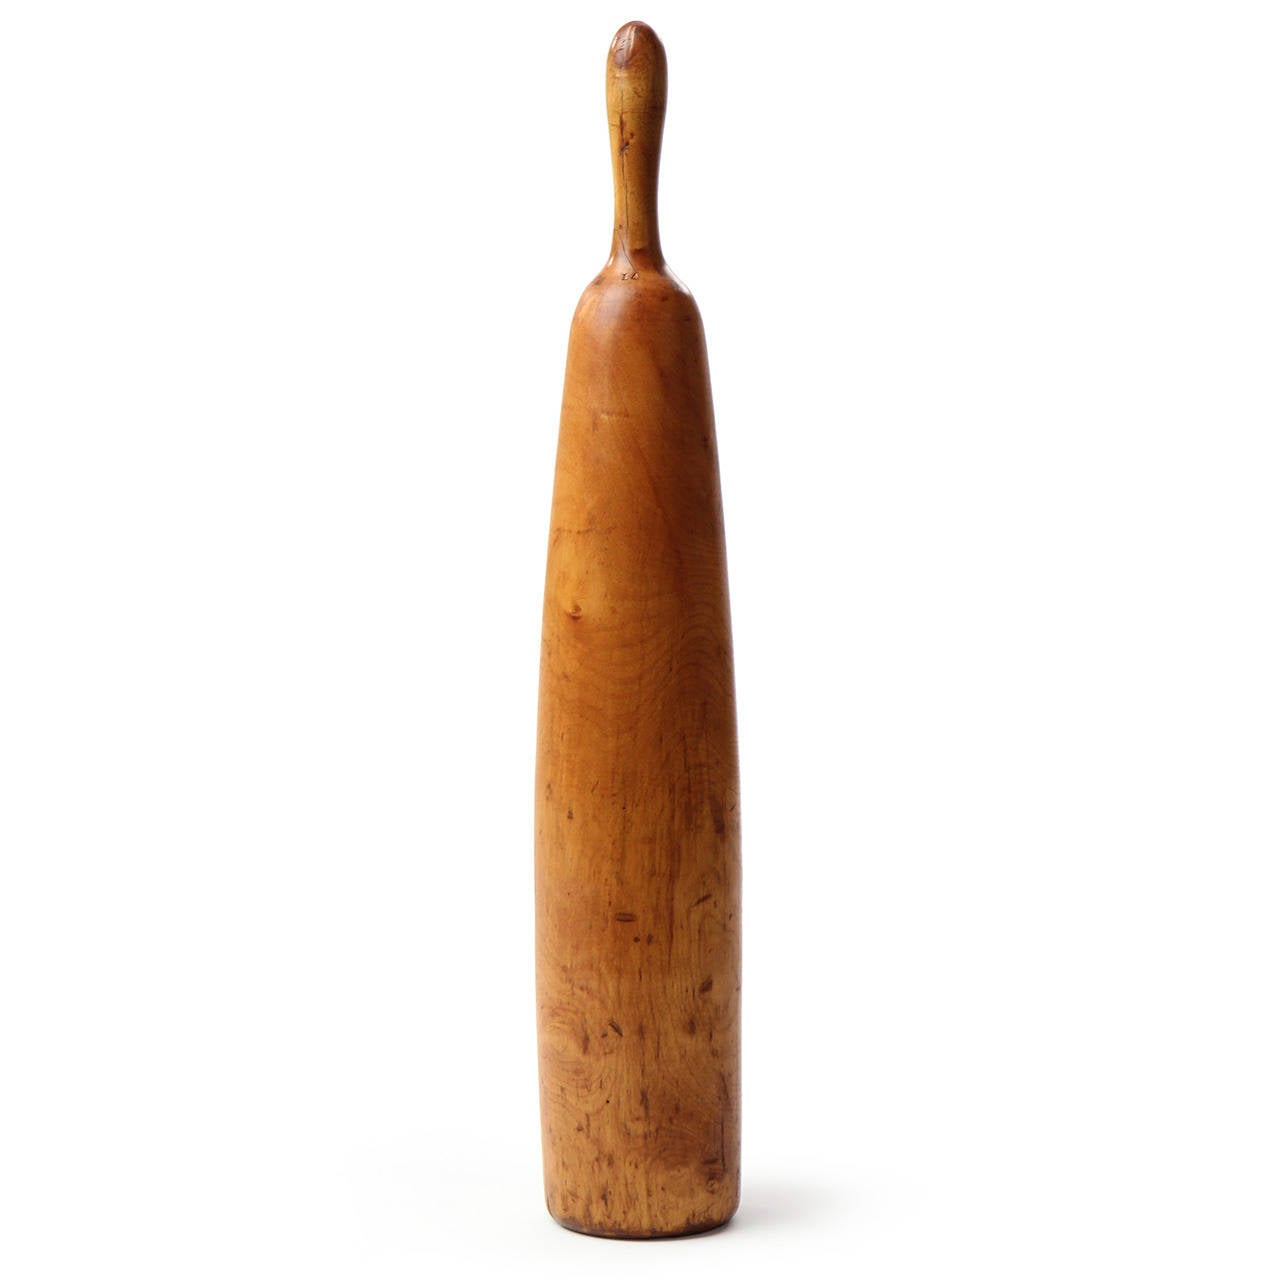 A well scaled and beautifully patinated hand-turned Indian exercise club crafted of honey-toned maple.